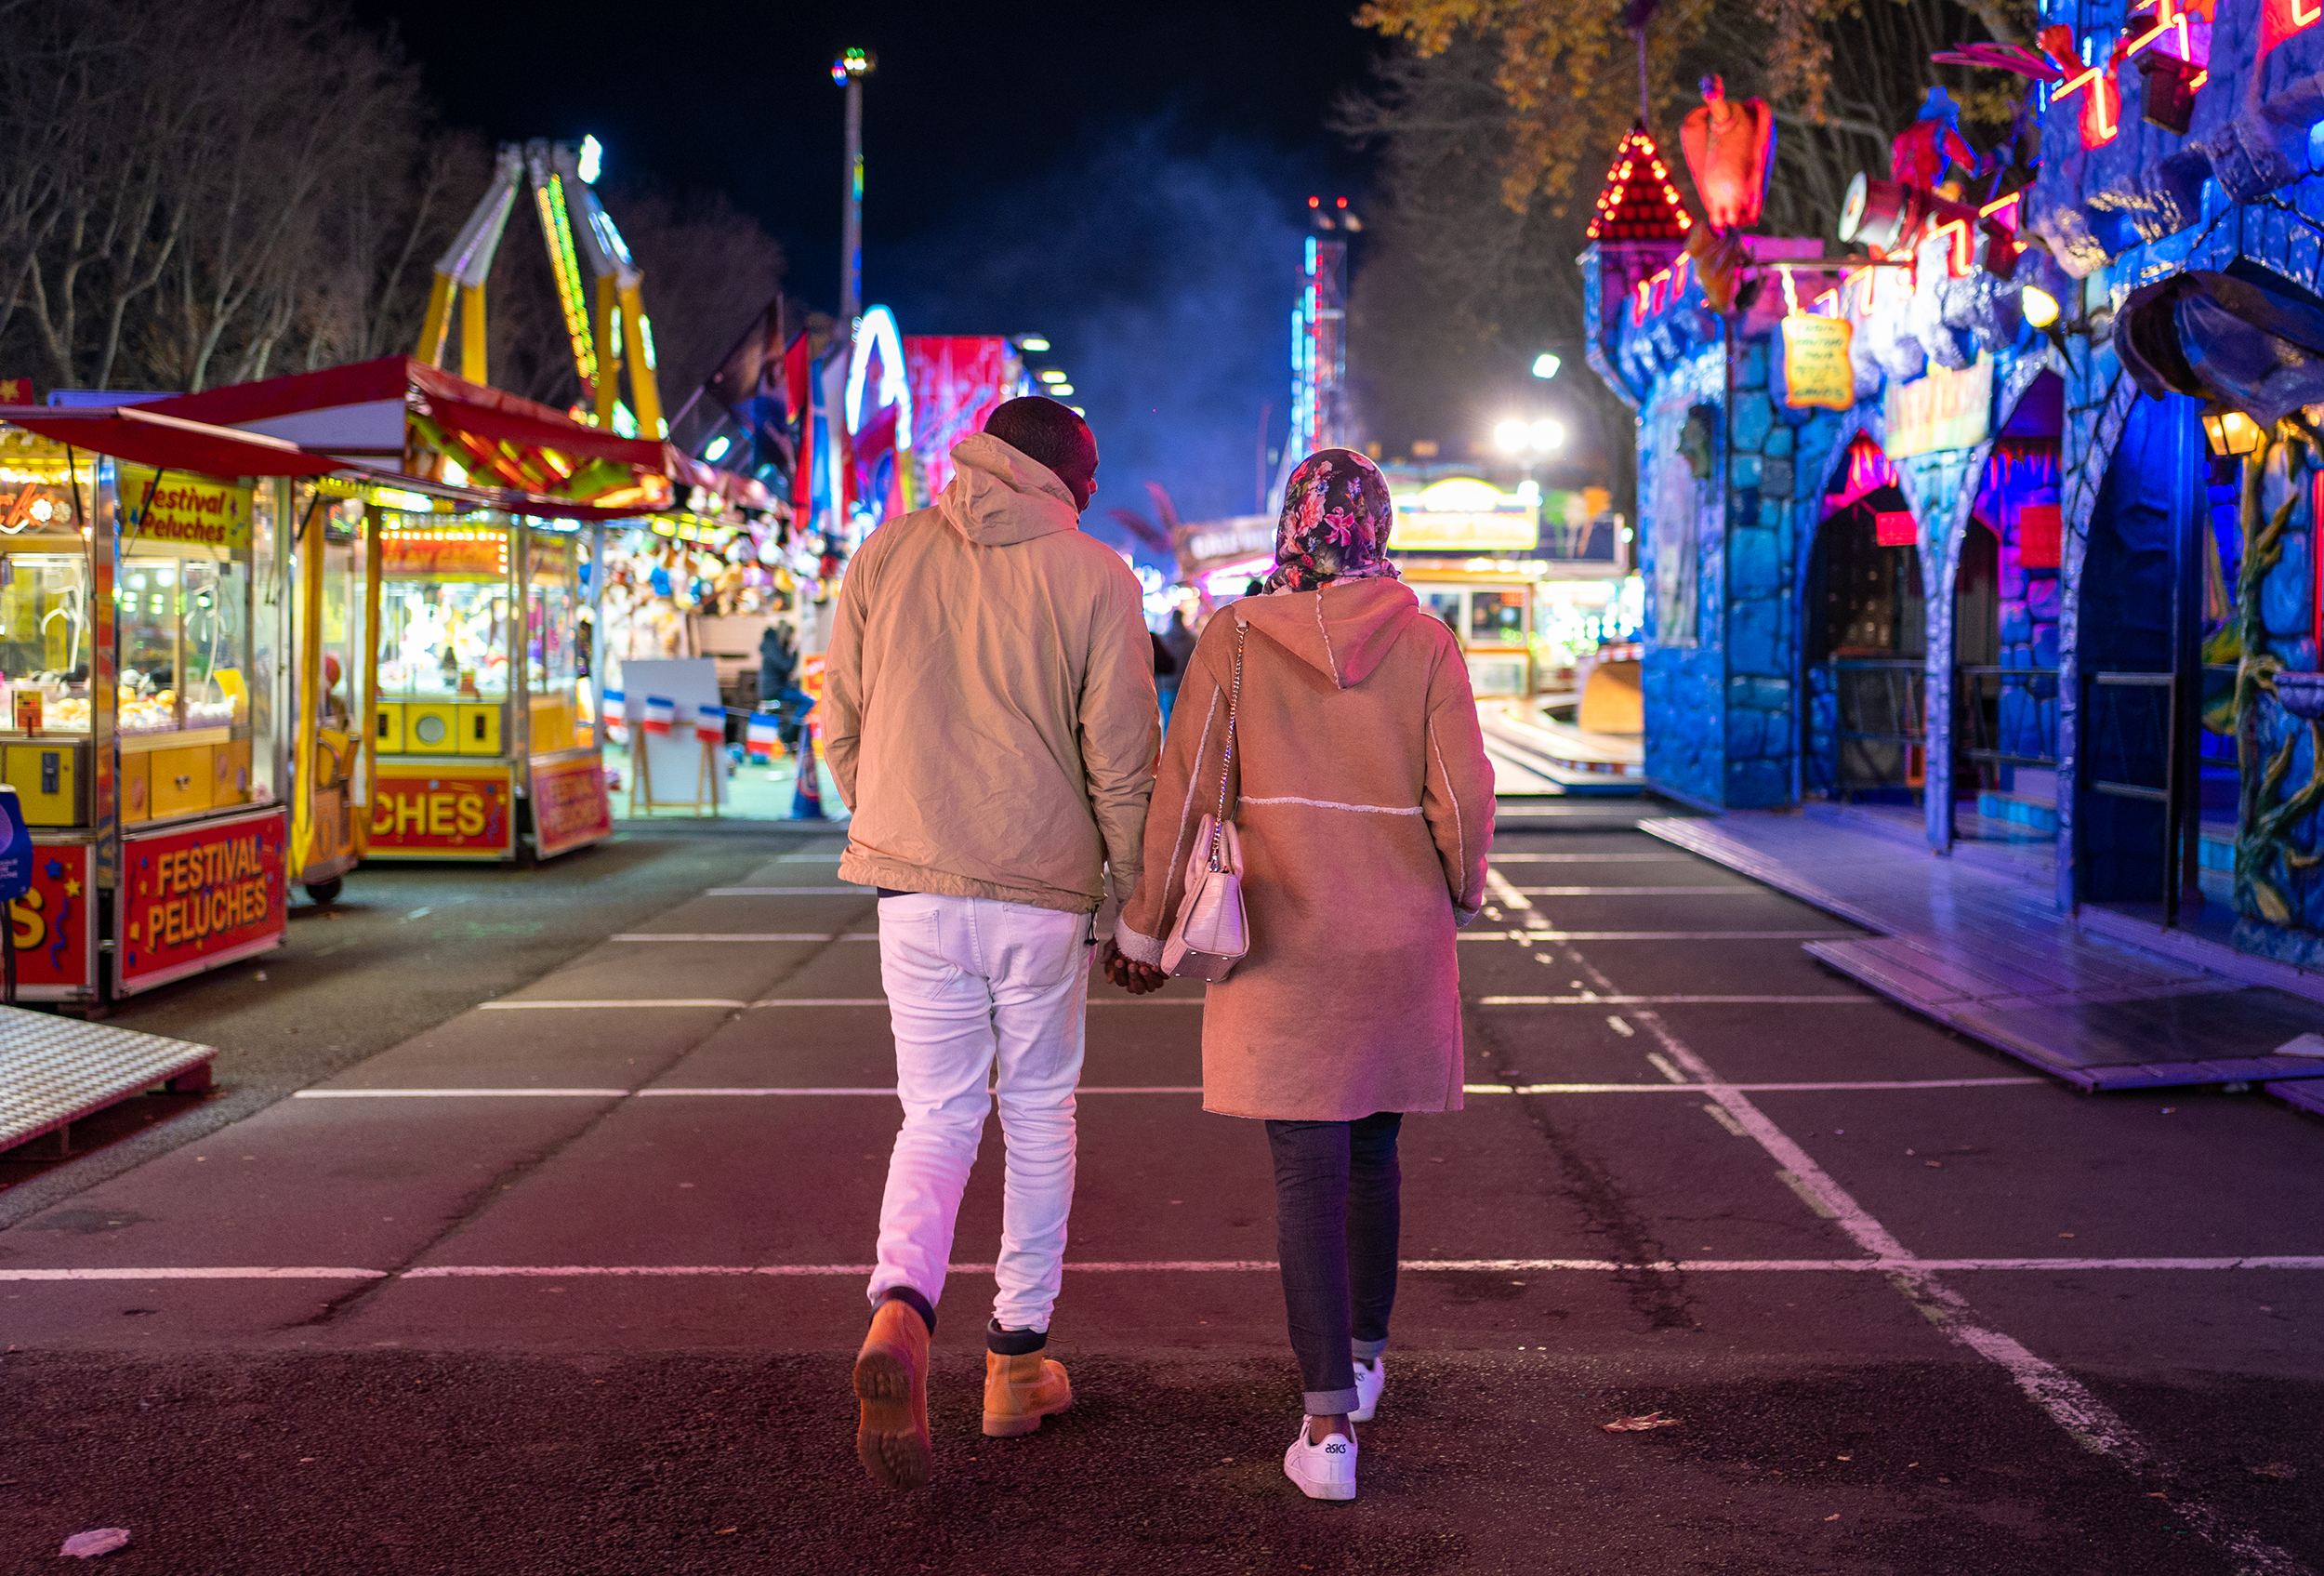 Moussa and his girlfriend Lina walk hand in hand at the Christmas Fair in Angers, France